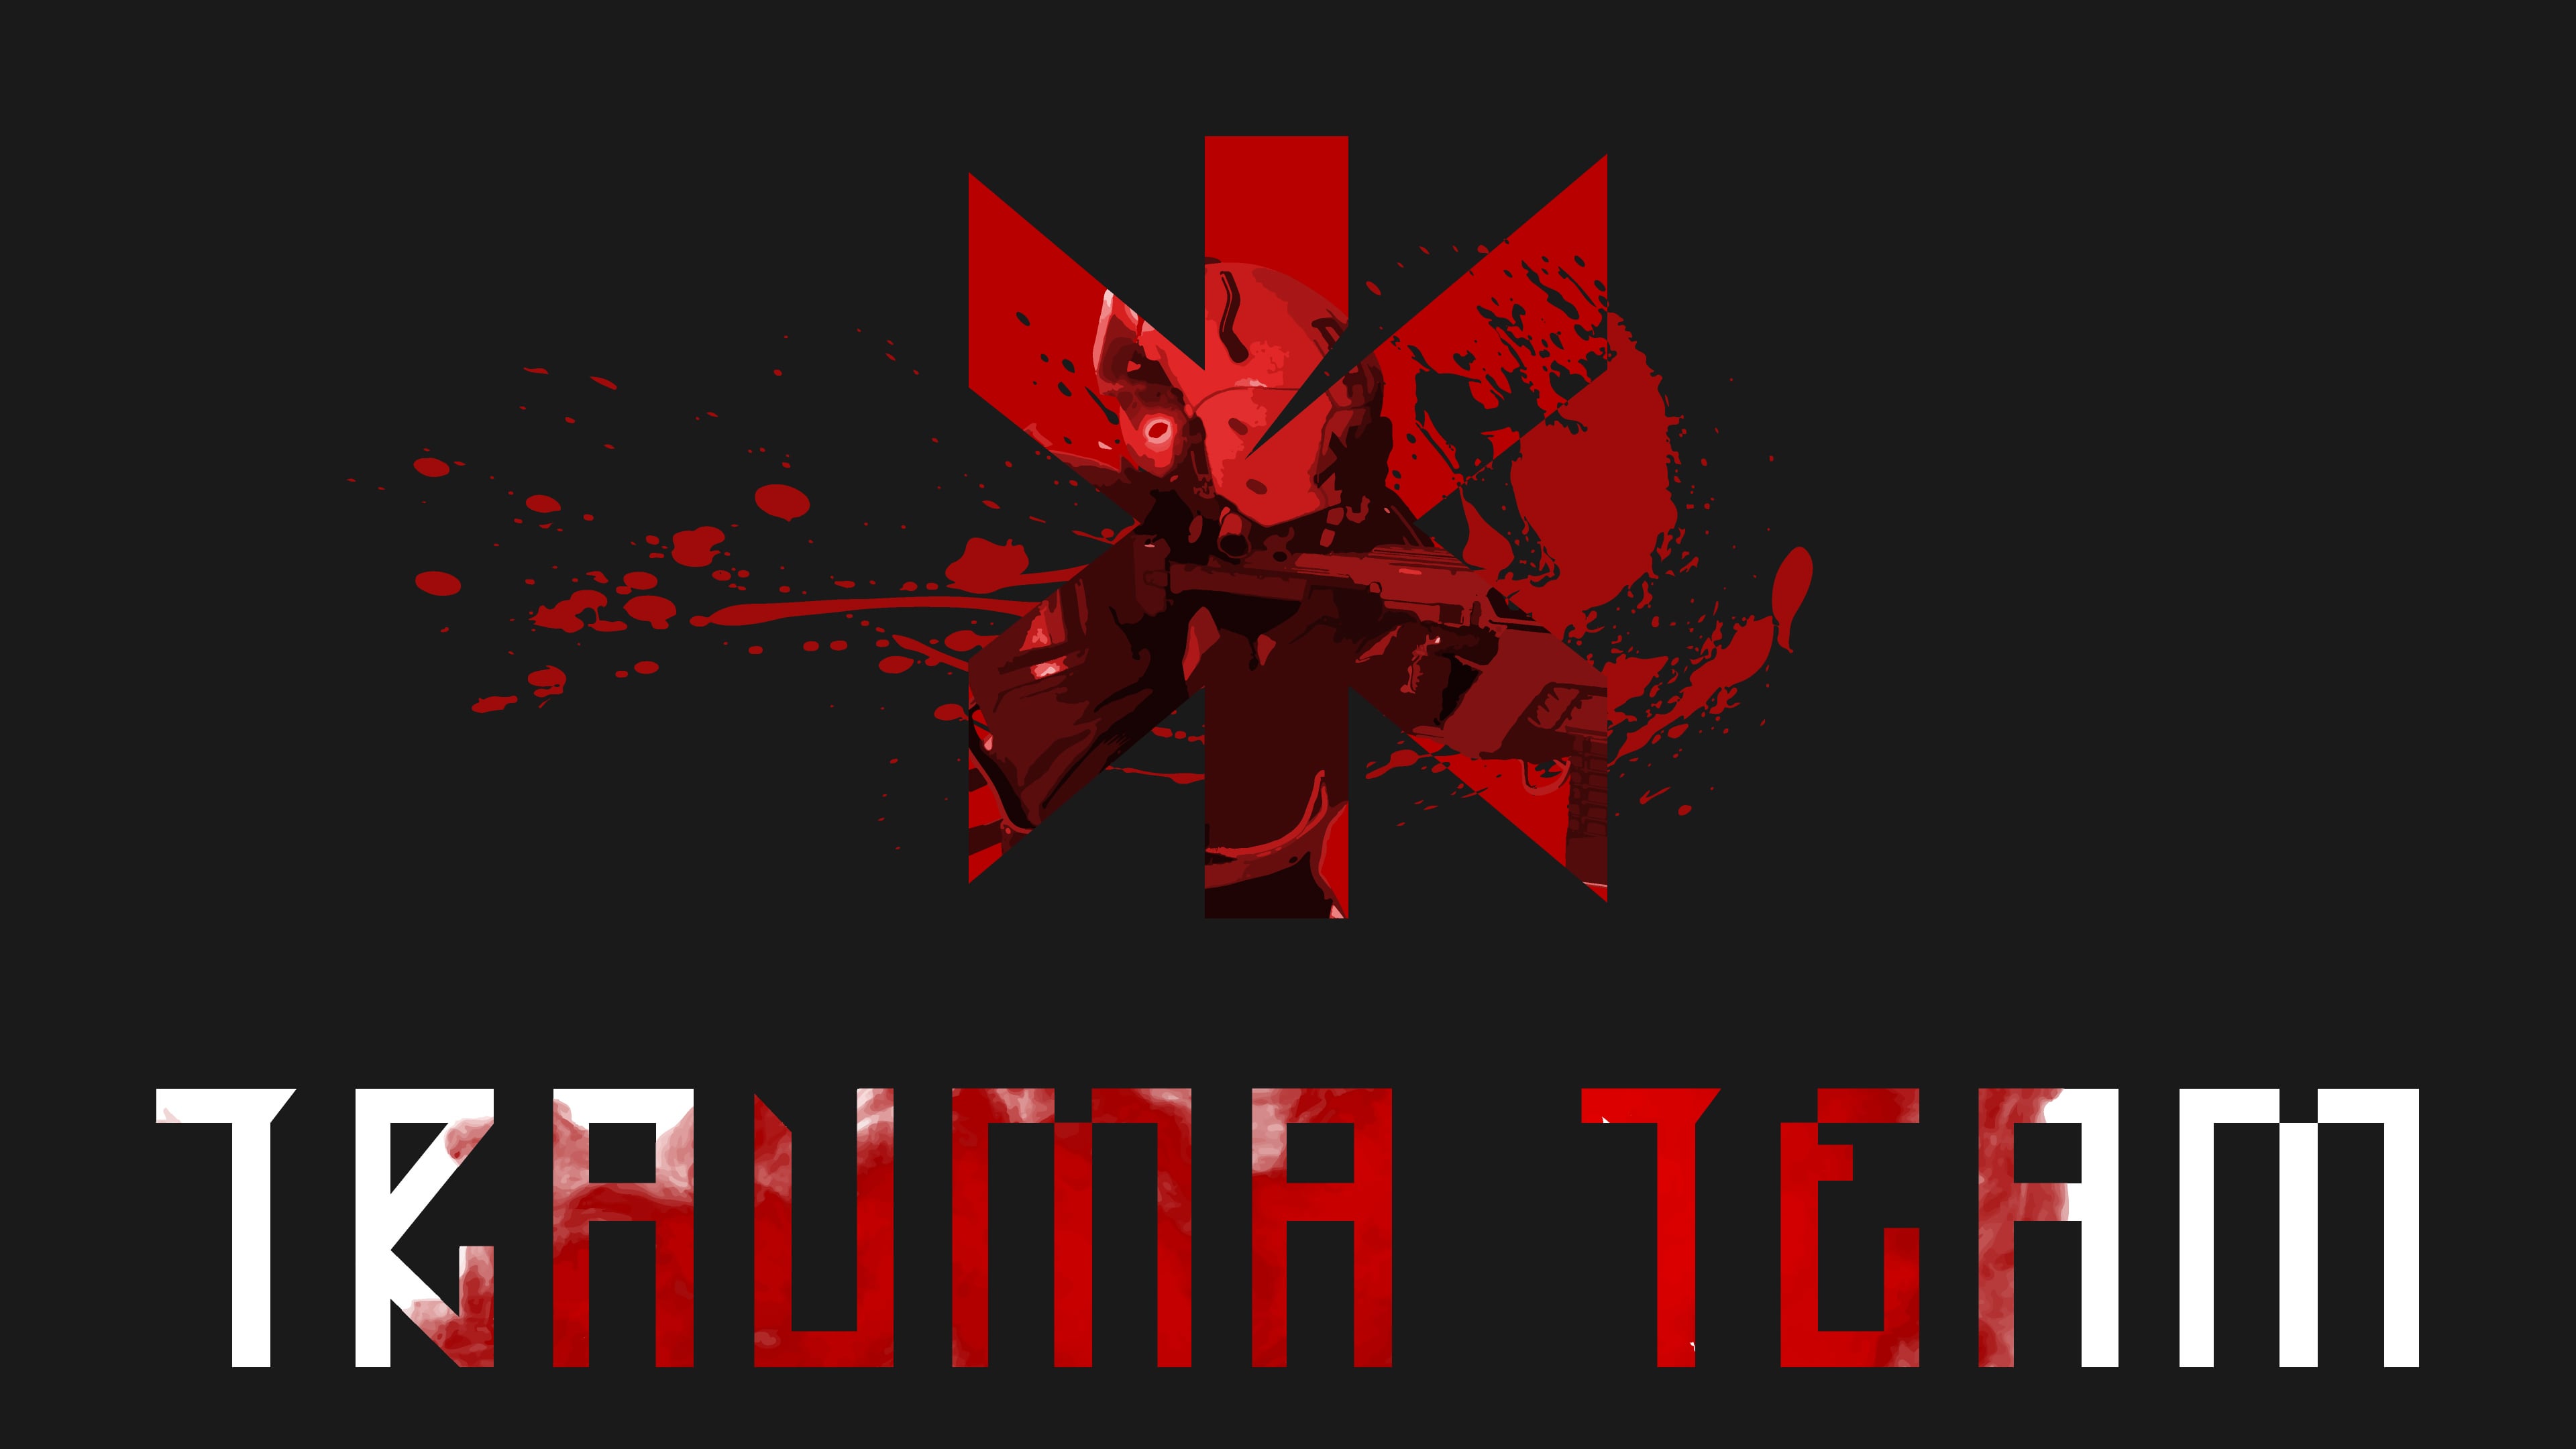 Made these wallpapers before I had ever heard of traumacore. Obv